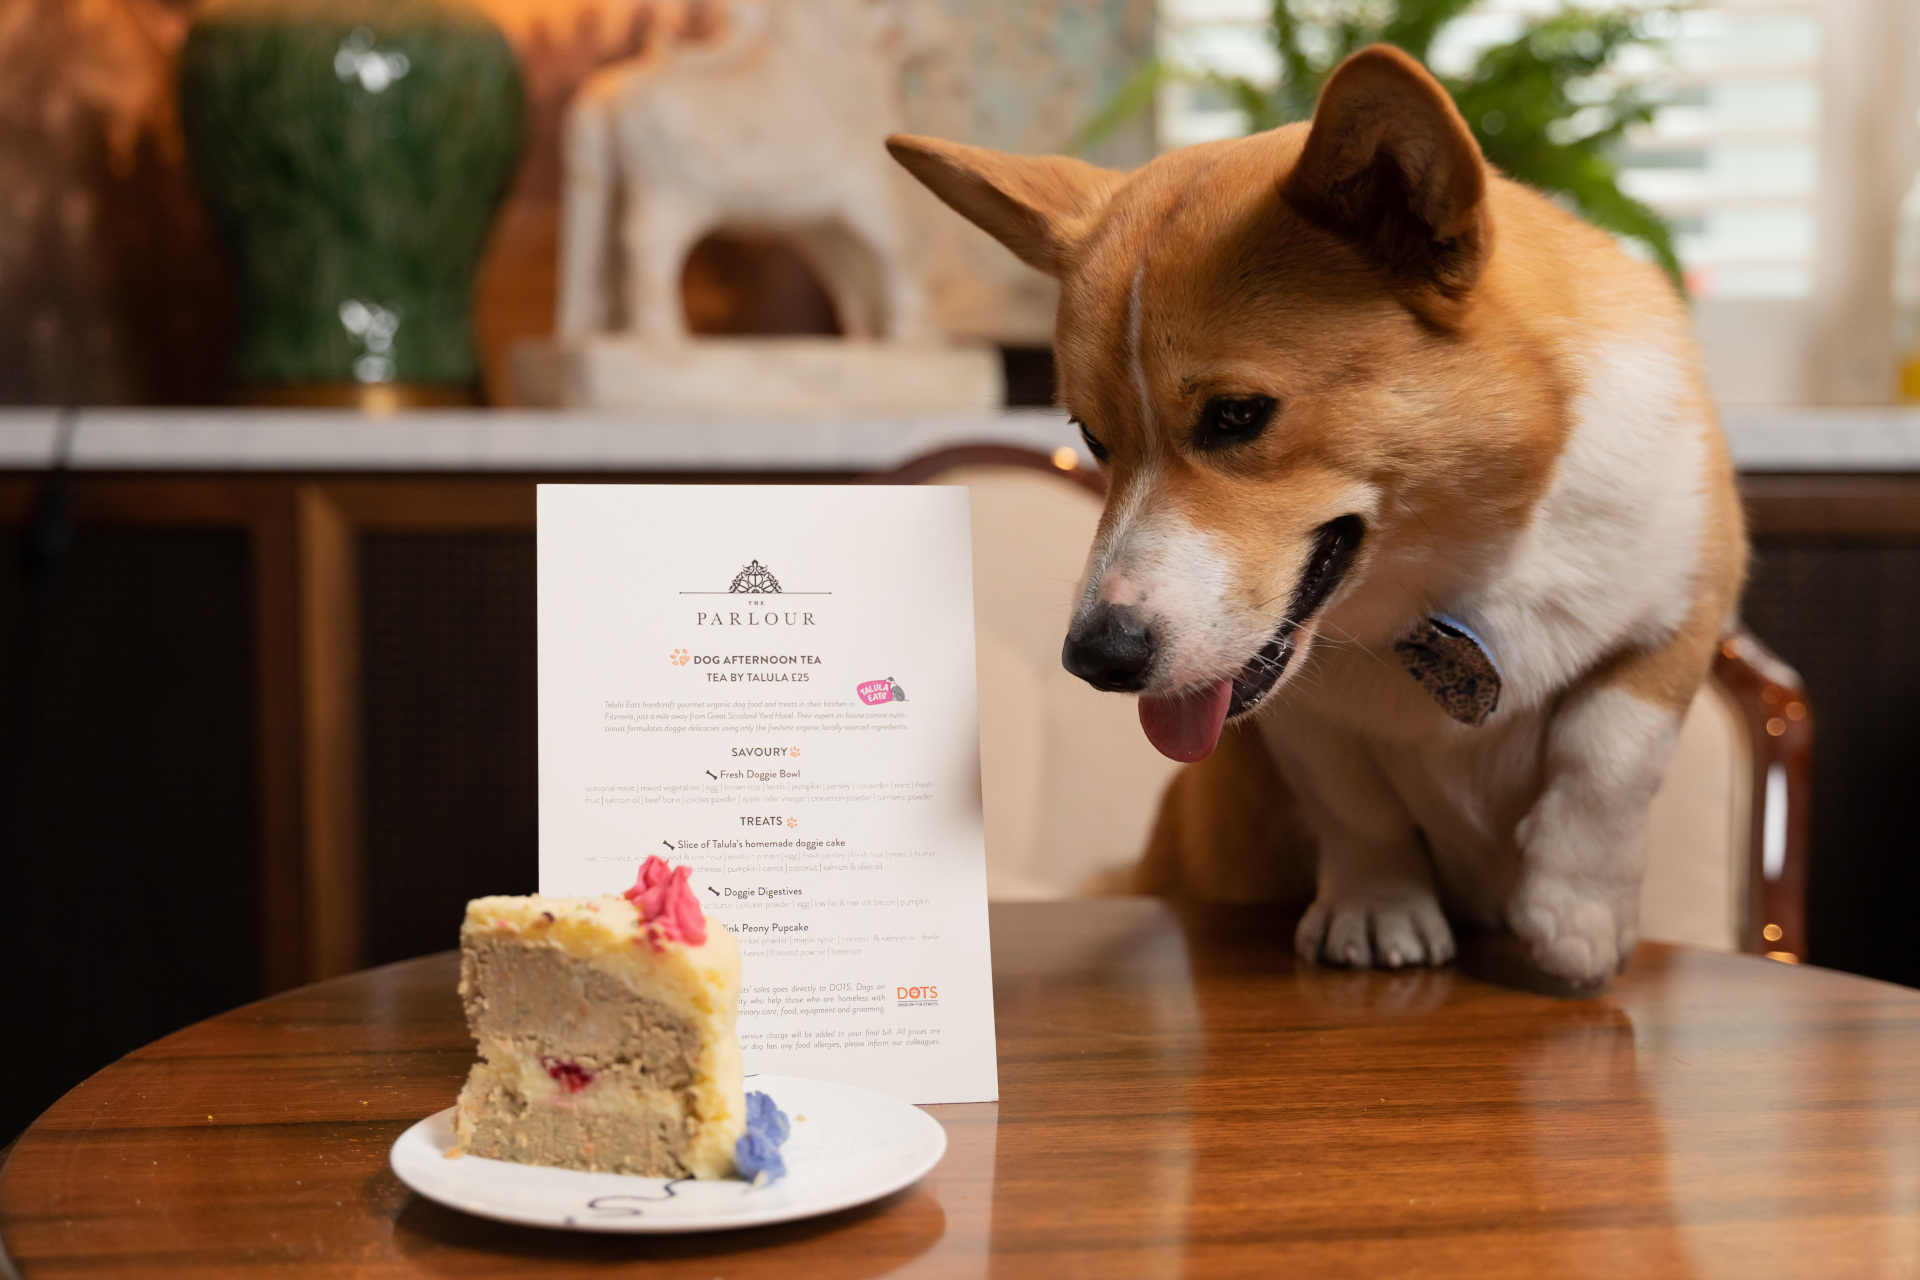 Dog with plate of cake and afternoon tea menu